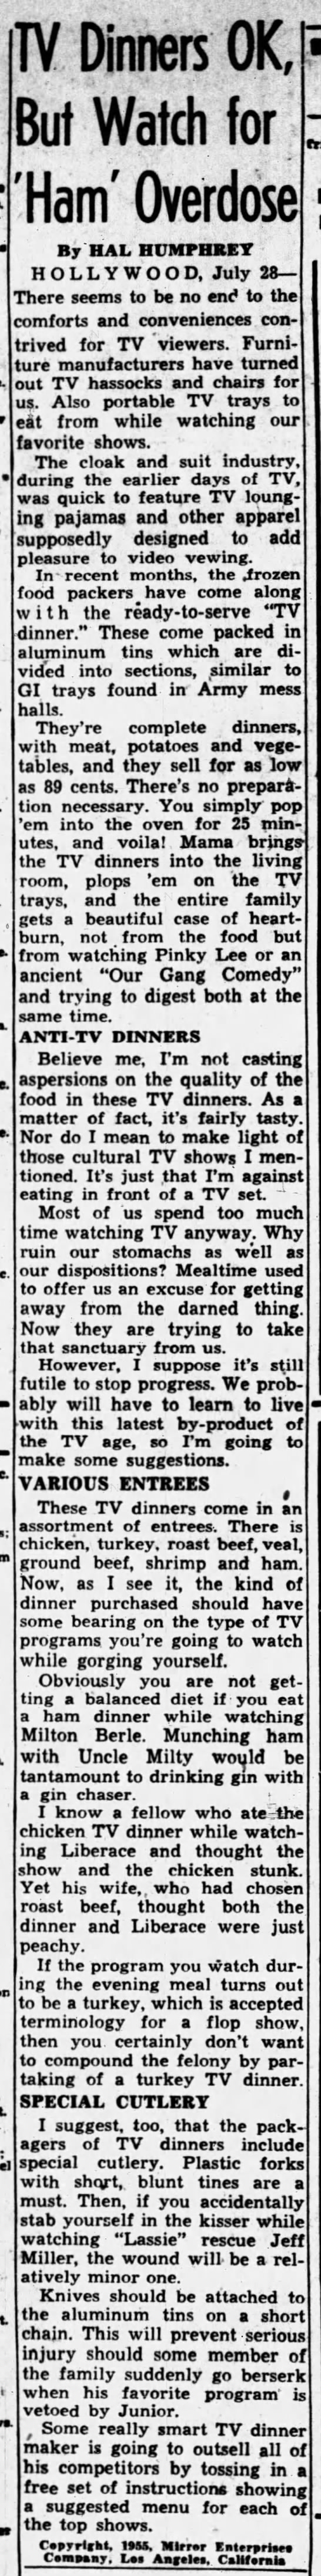 TV dinners join ranks of other tv "comforts and conveniences" (1955) - 